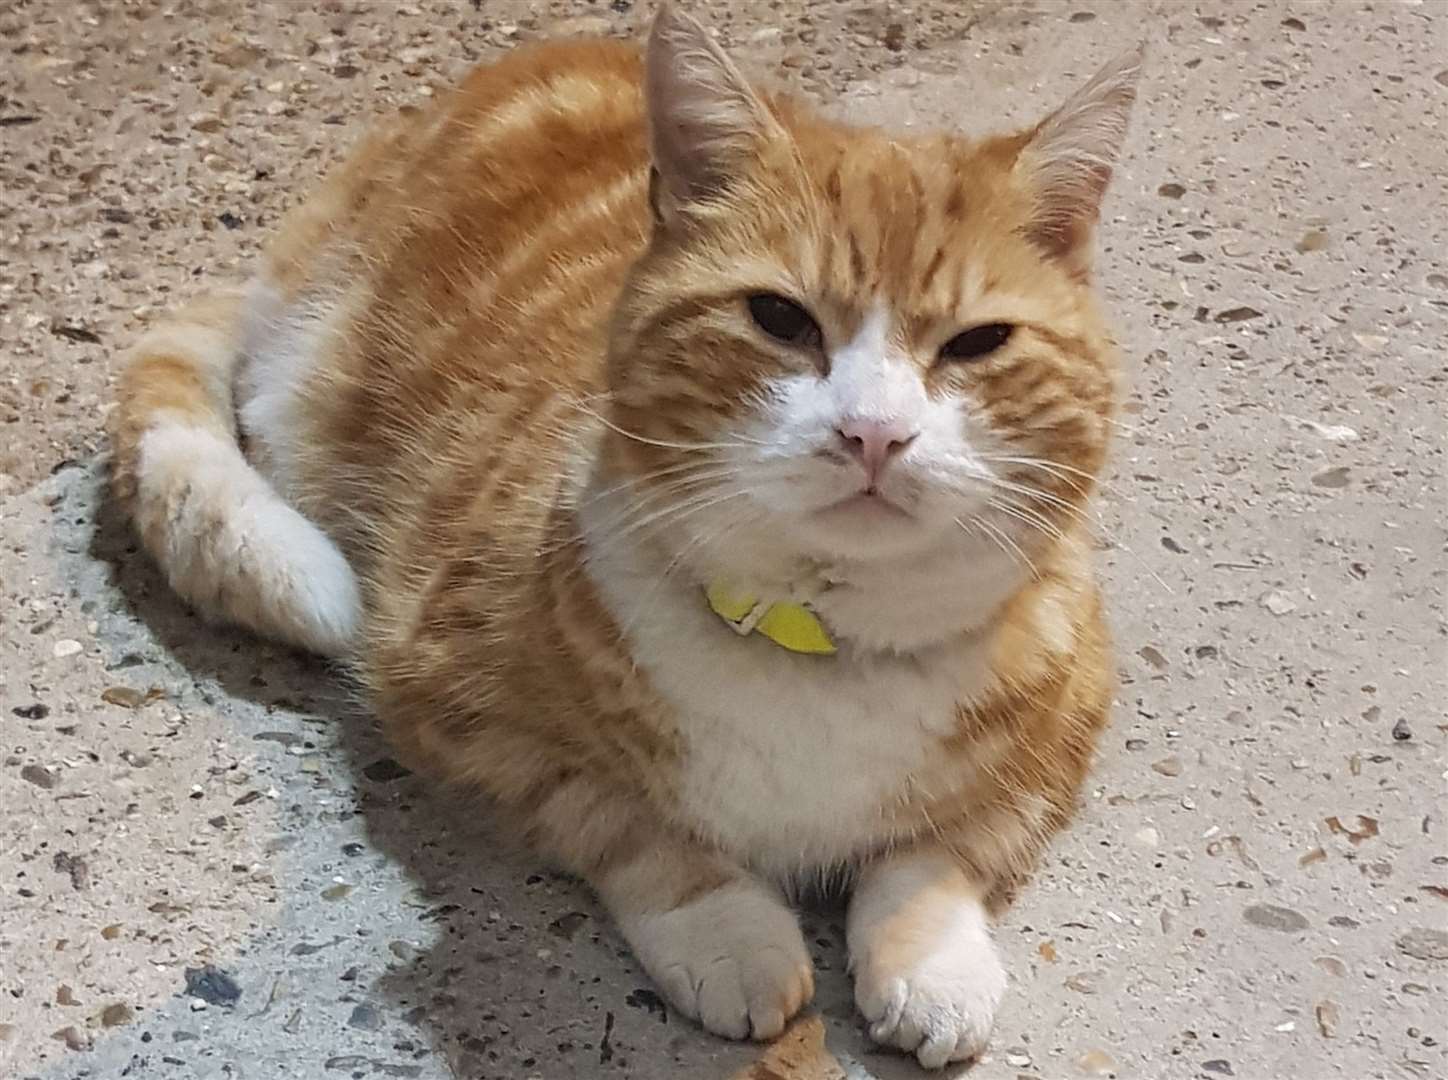 Tripod the cat from Gillingham rail station has gone missing. Picture: Se_Railway on Twitter